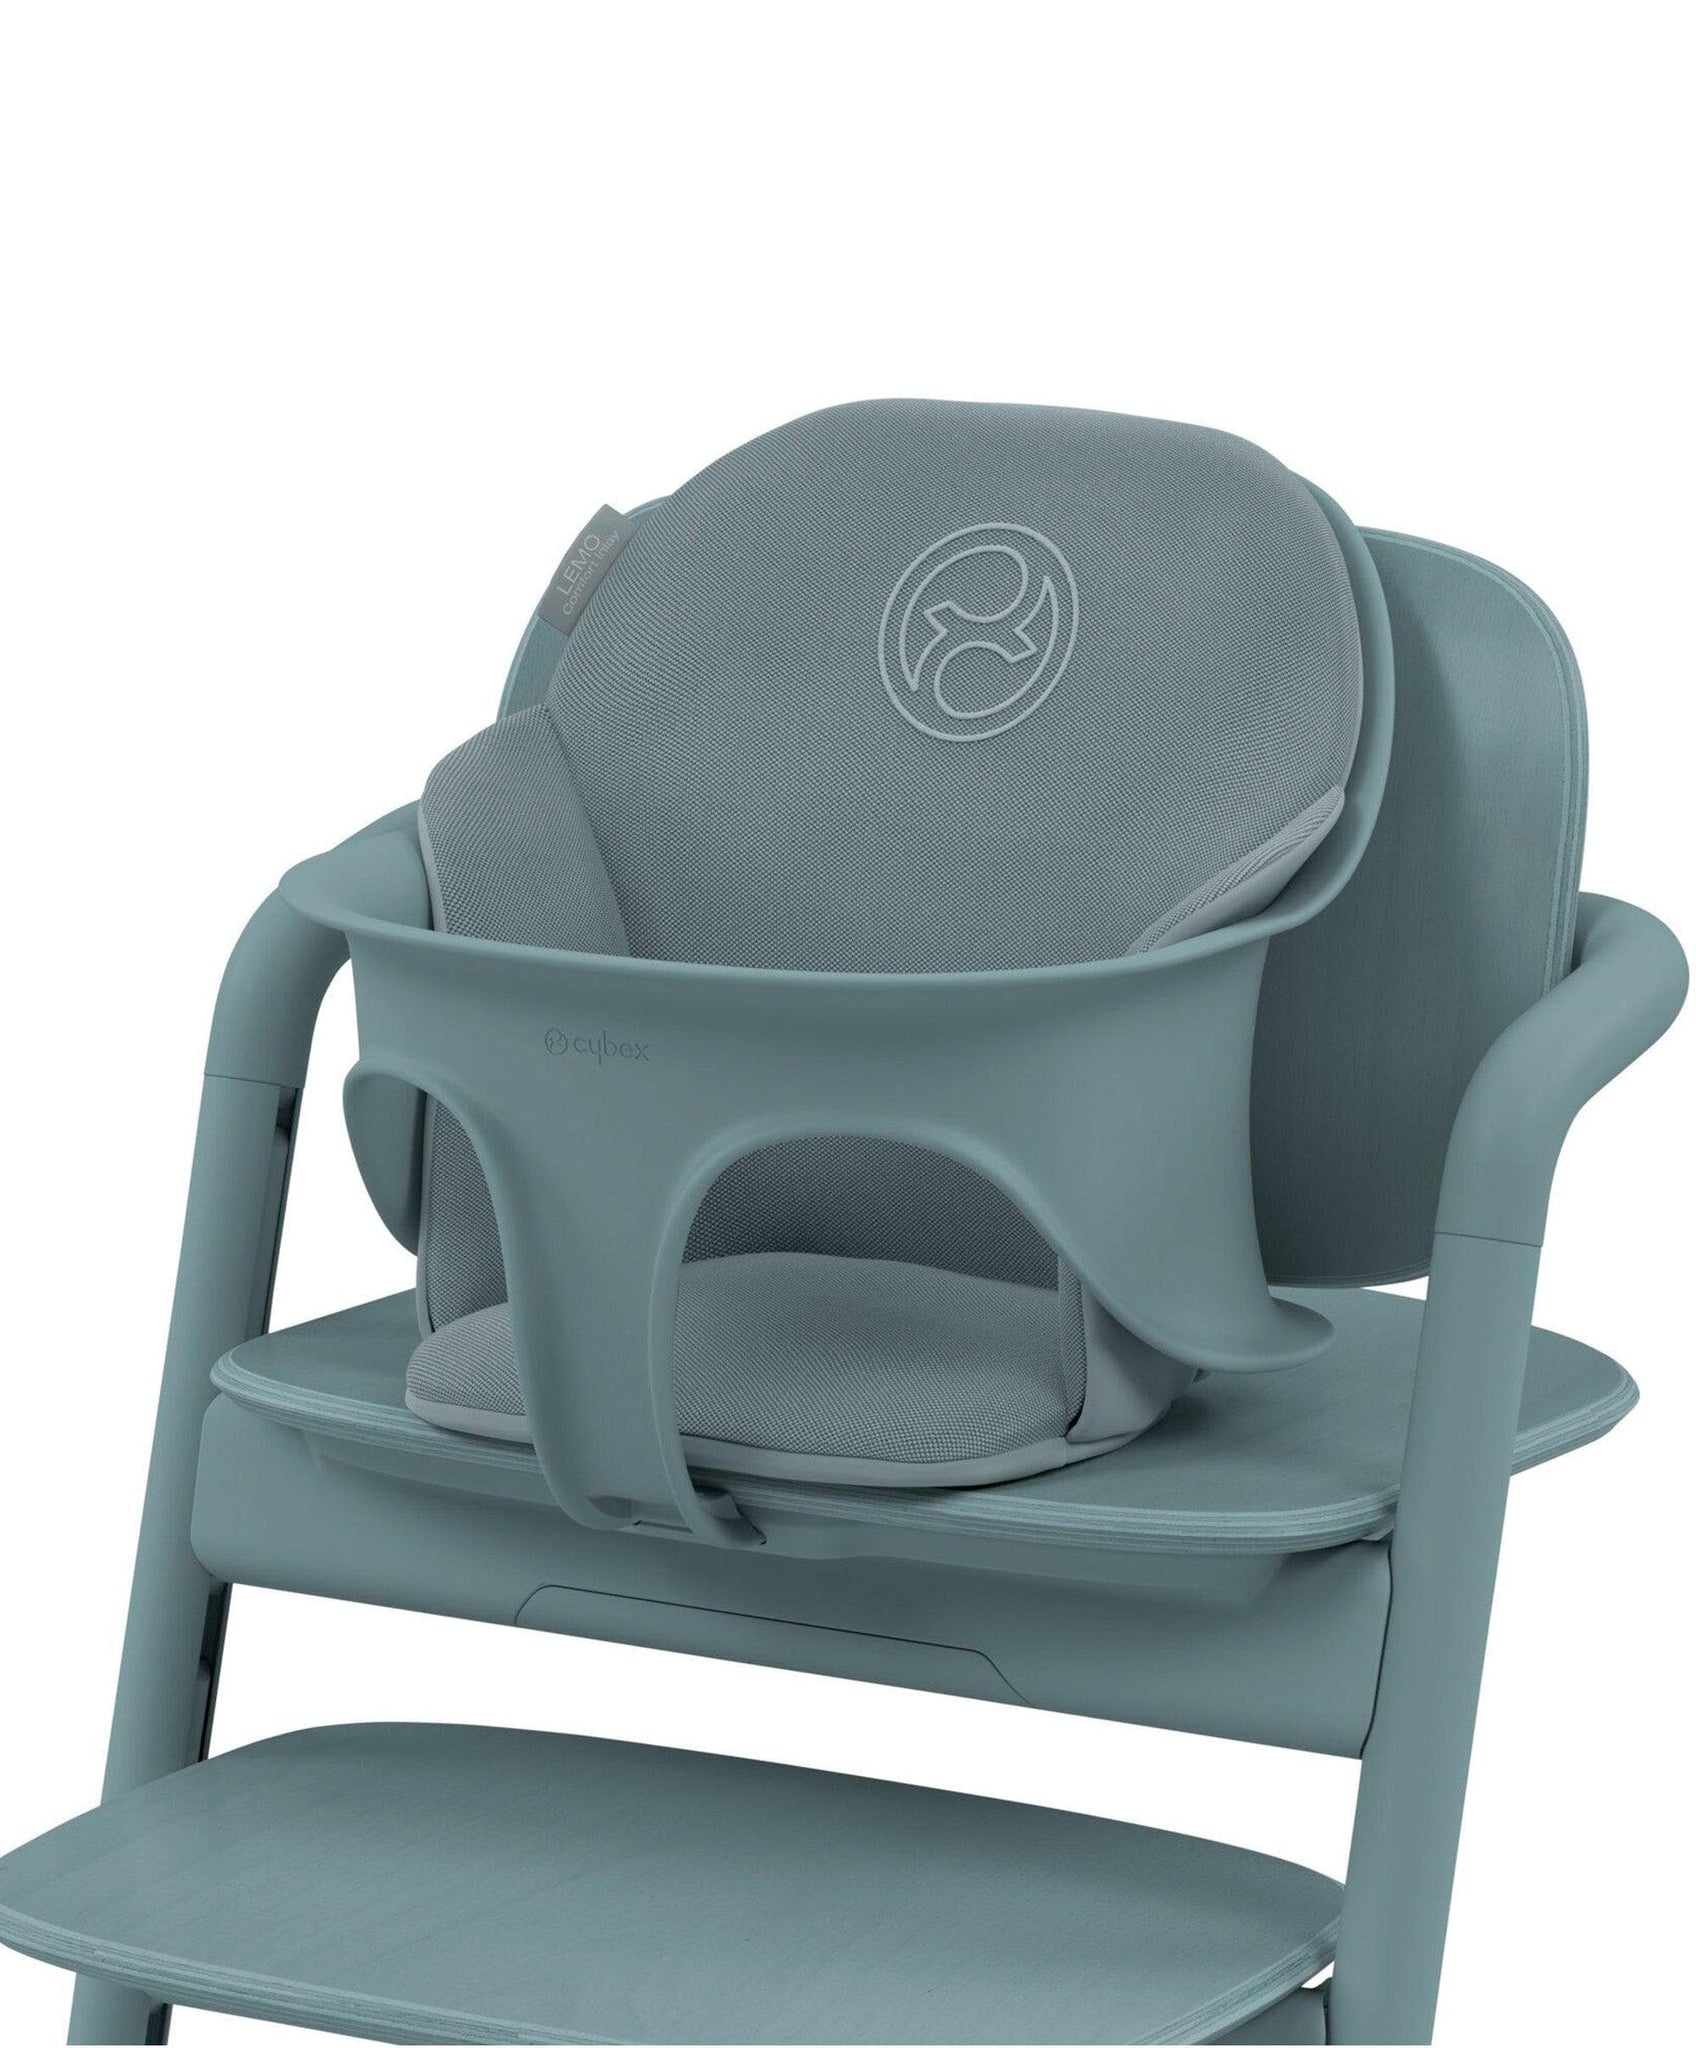 Make mealtime a breeze with the new Cybex Lemo 2 high chair! Able